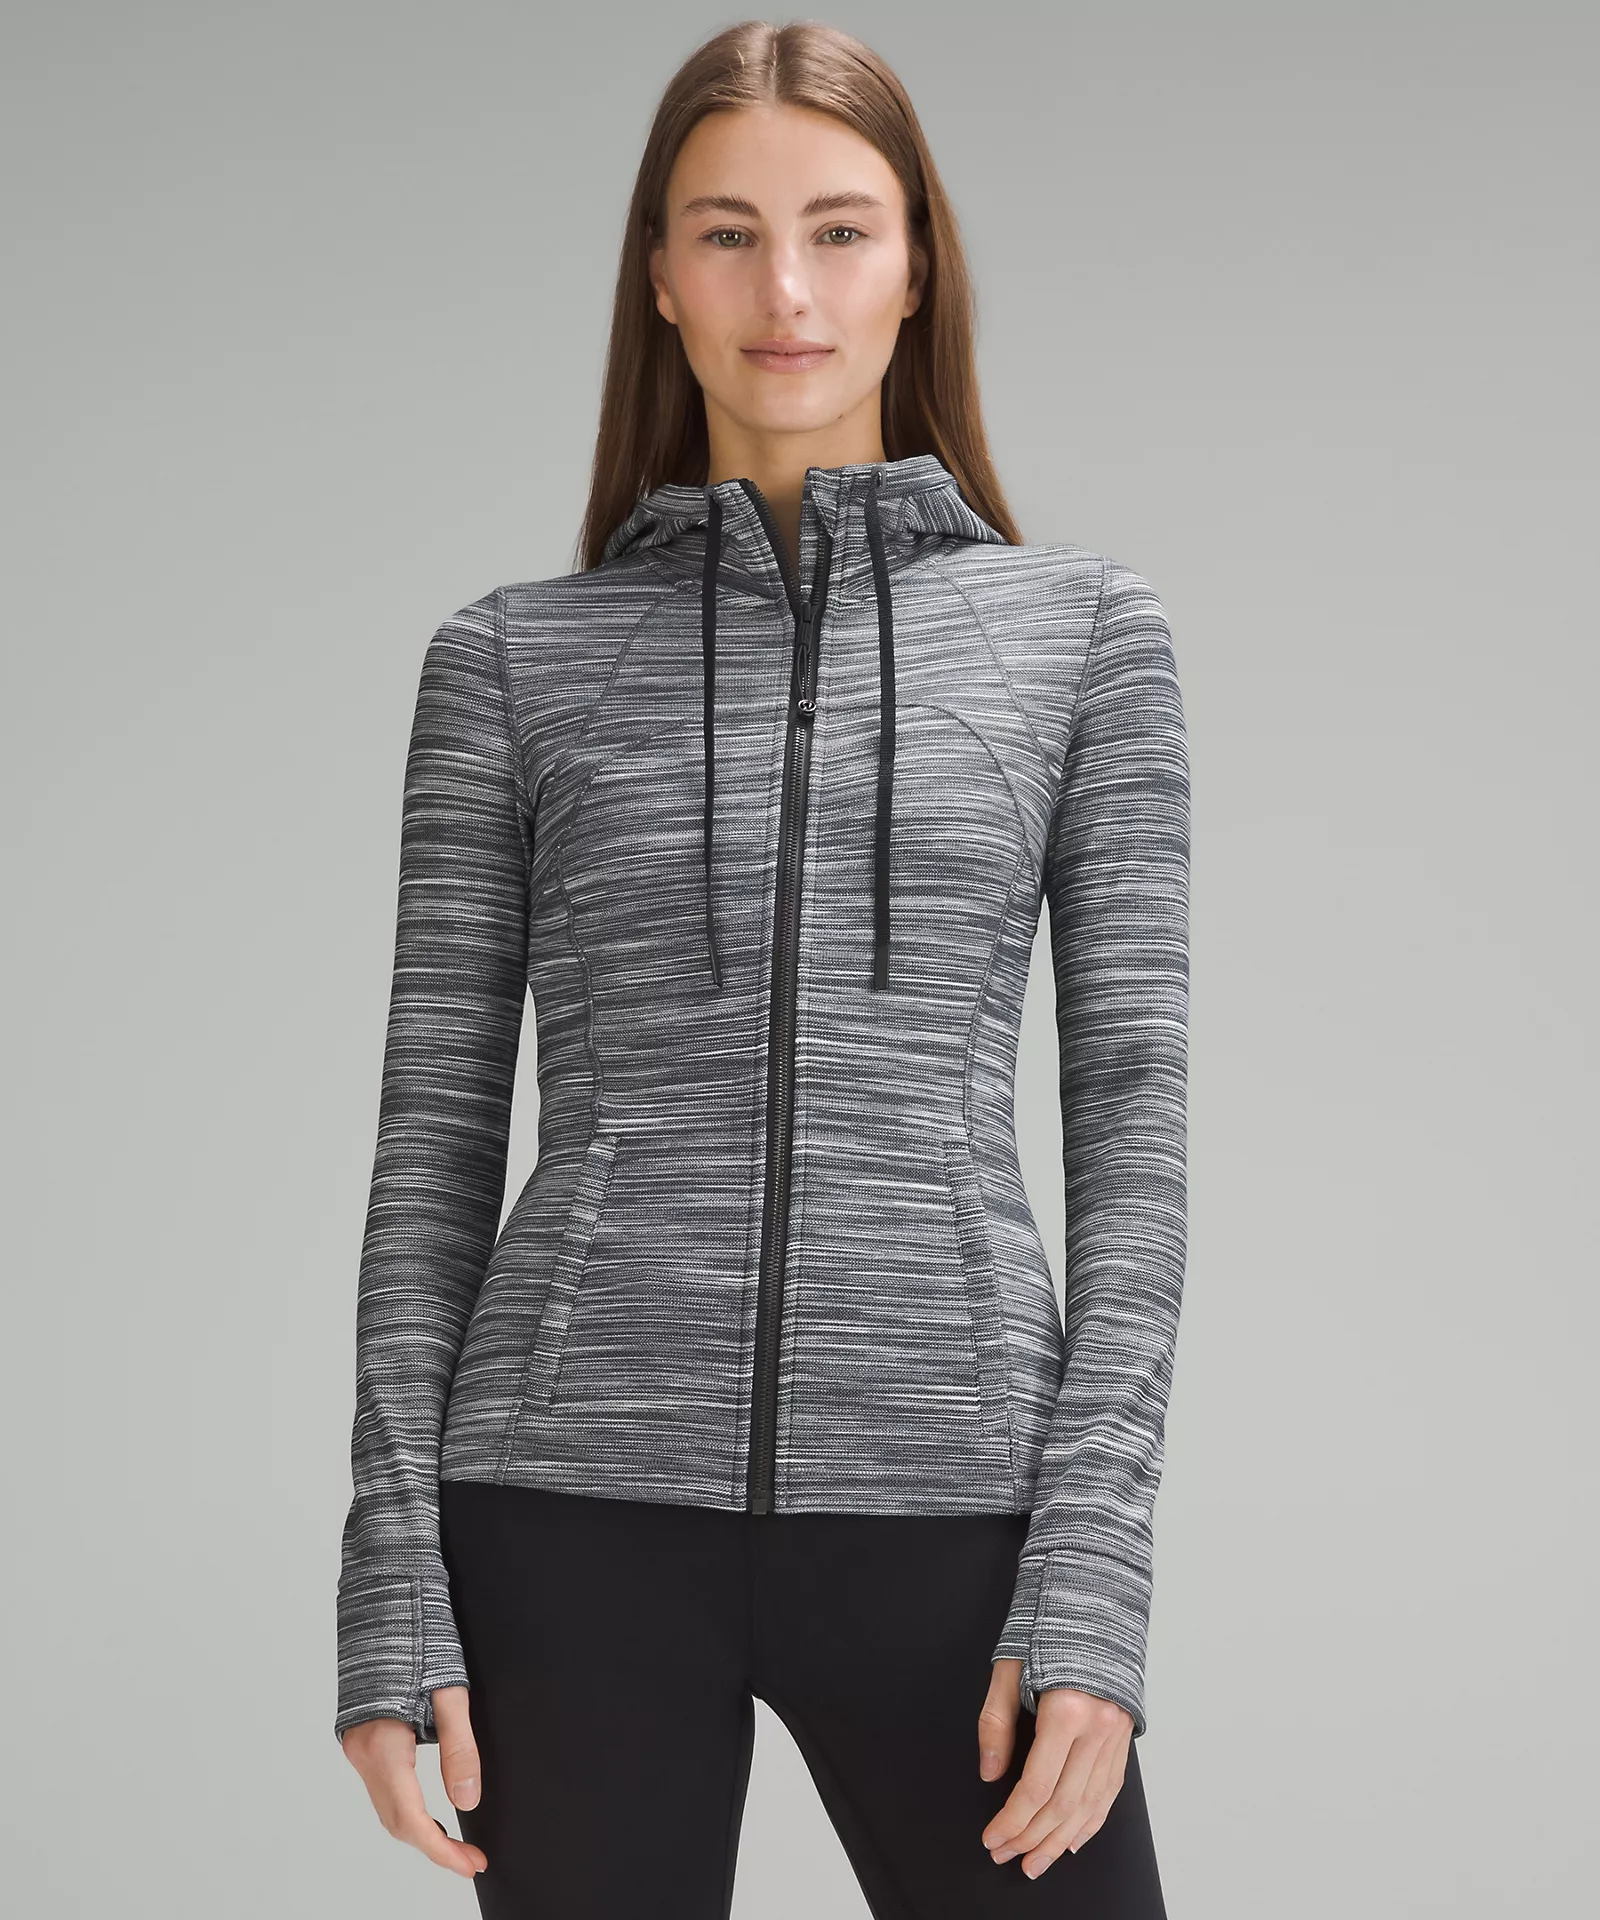 A staple': Lululemon shoppers are obsessed with this versatile Define jacket